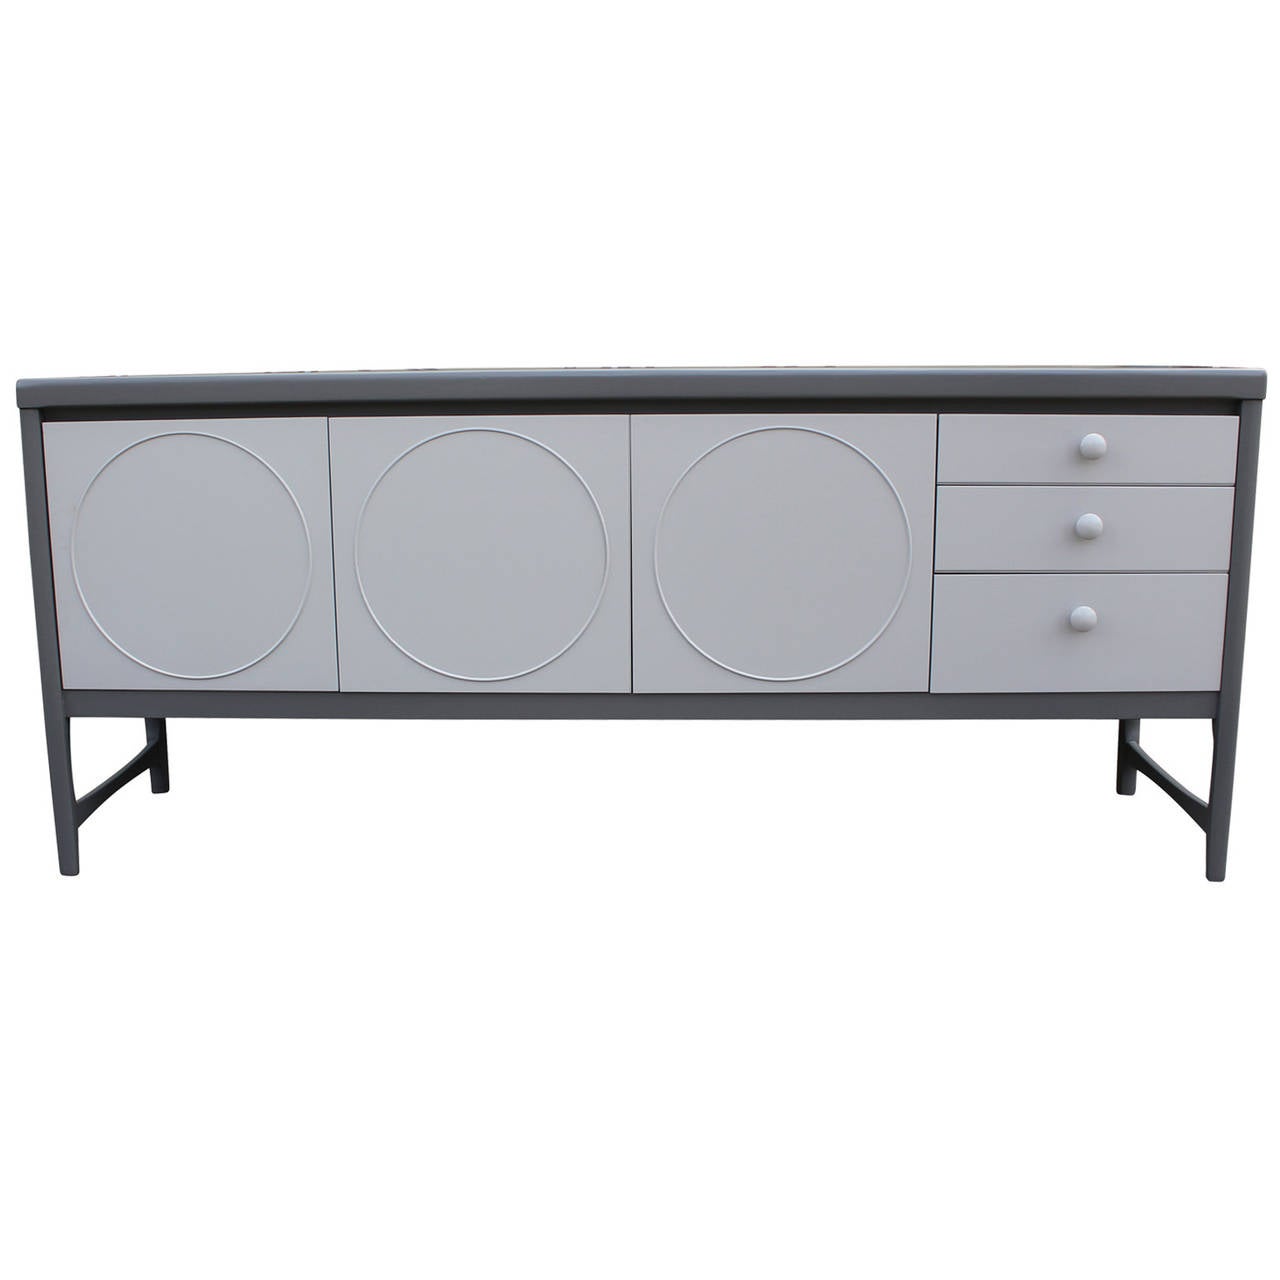 Elegant sideboard freshly lacquered in a two tone grey. Door fronts have nice circle details. Left door drops down. Two center doors open to a single shelf. Top drawer is slotted for service.